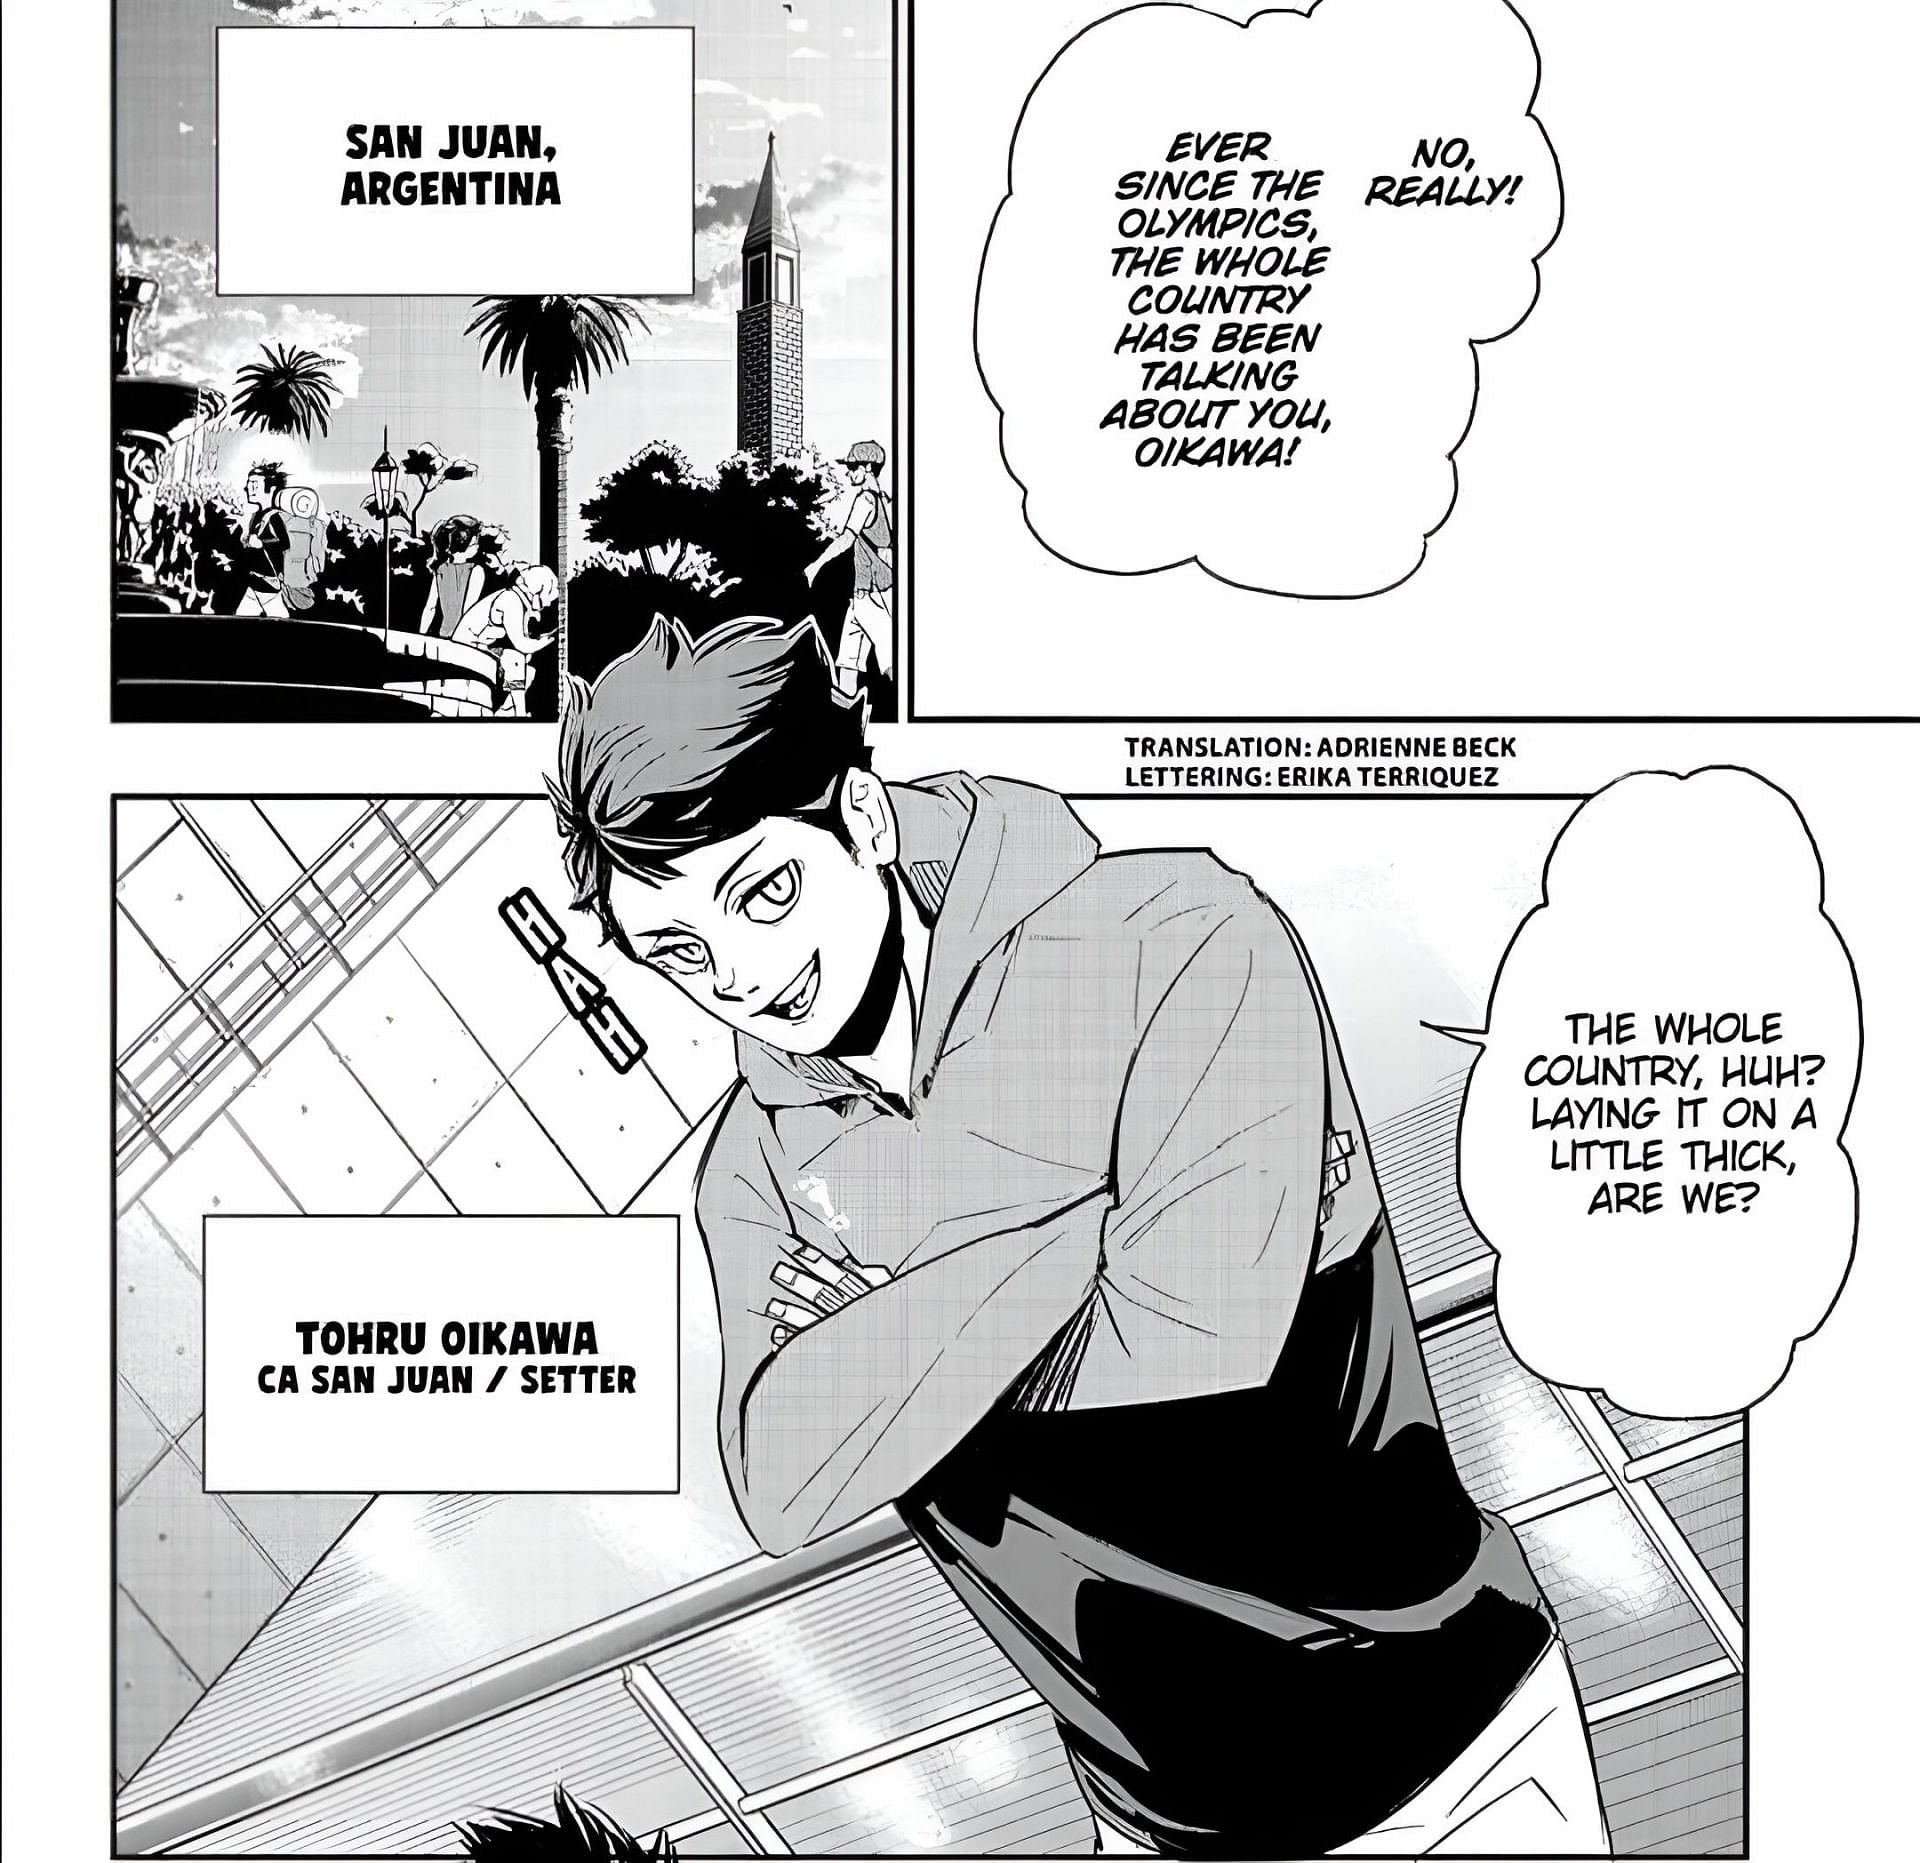 AJ on X: The Ballboy mini-arc in Haikyuu is seriously amazing and